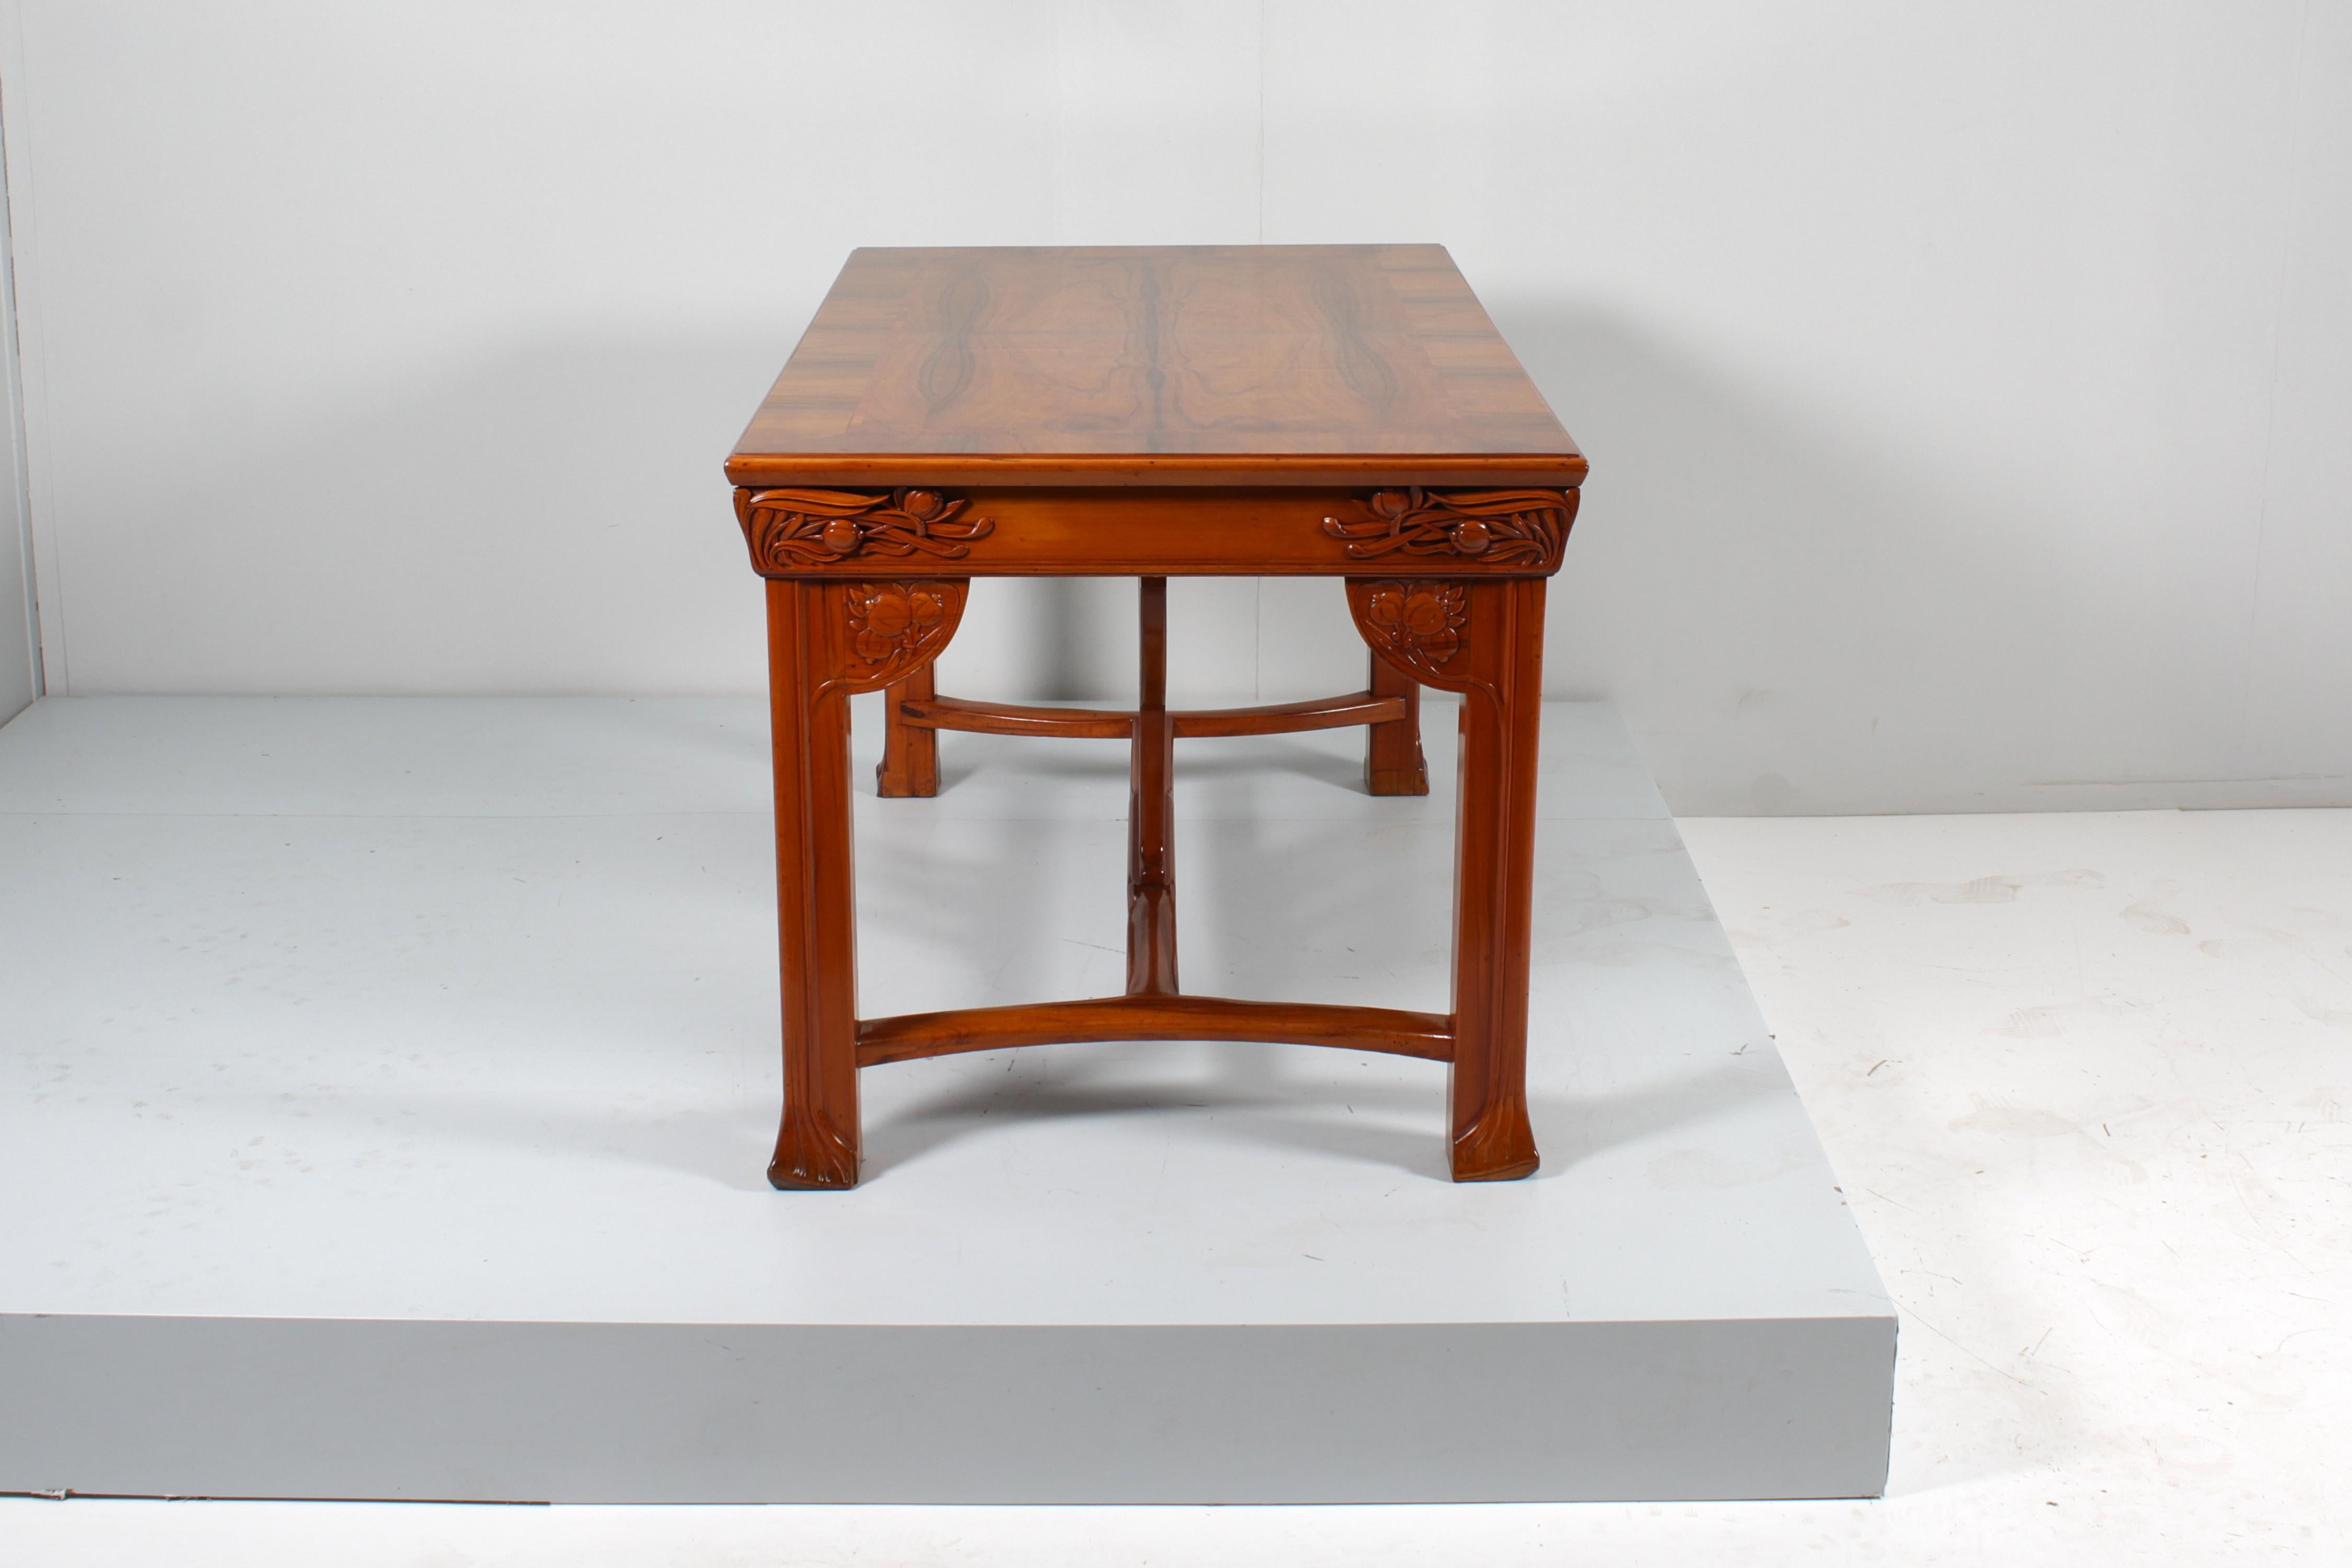 Hand-Crafted Art Nouveau V. Ducrot Restored Inlaid and Carved Wood Table 1900 Italy For Sale